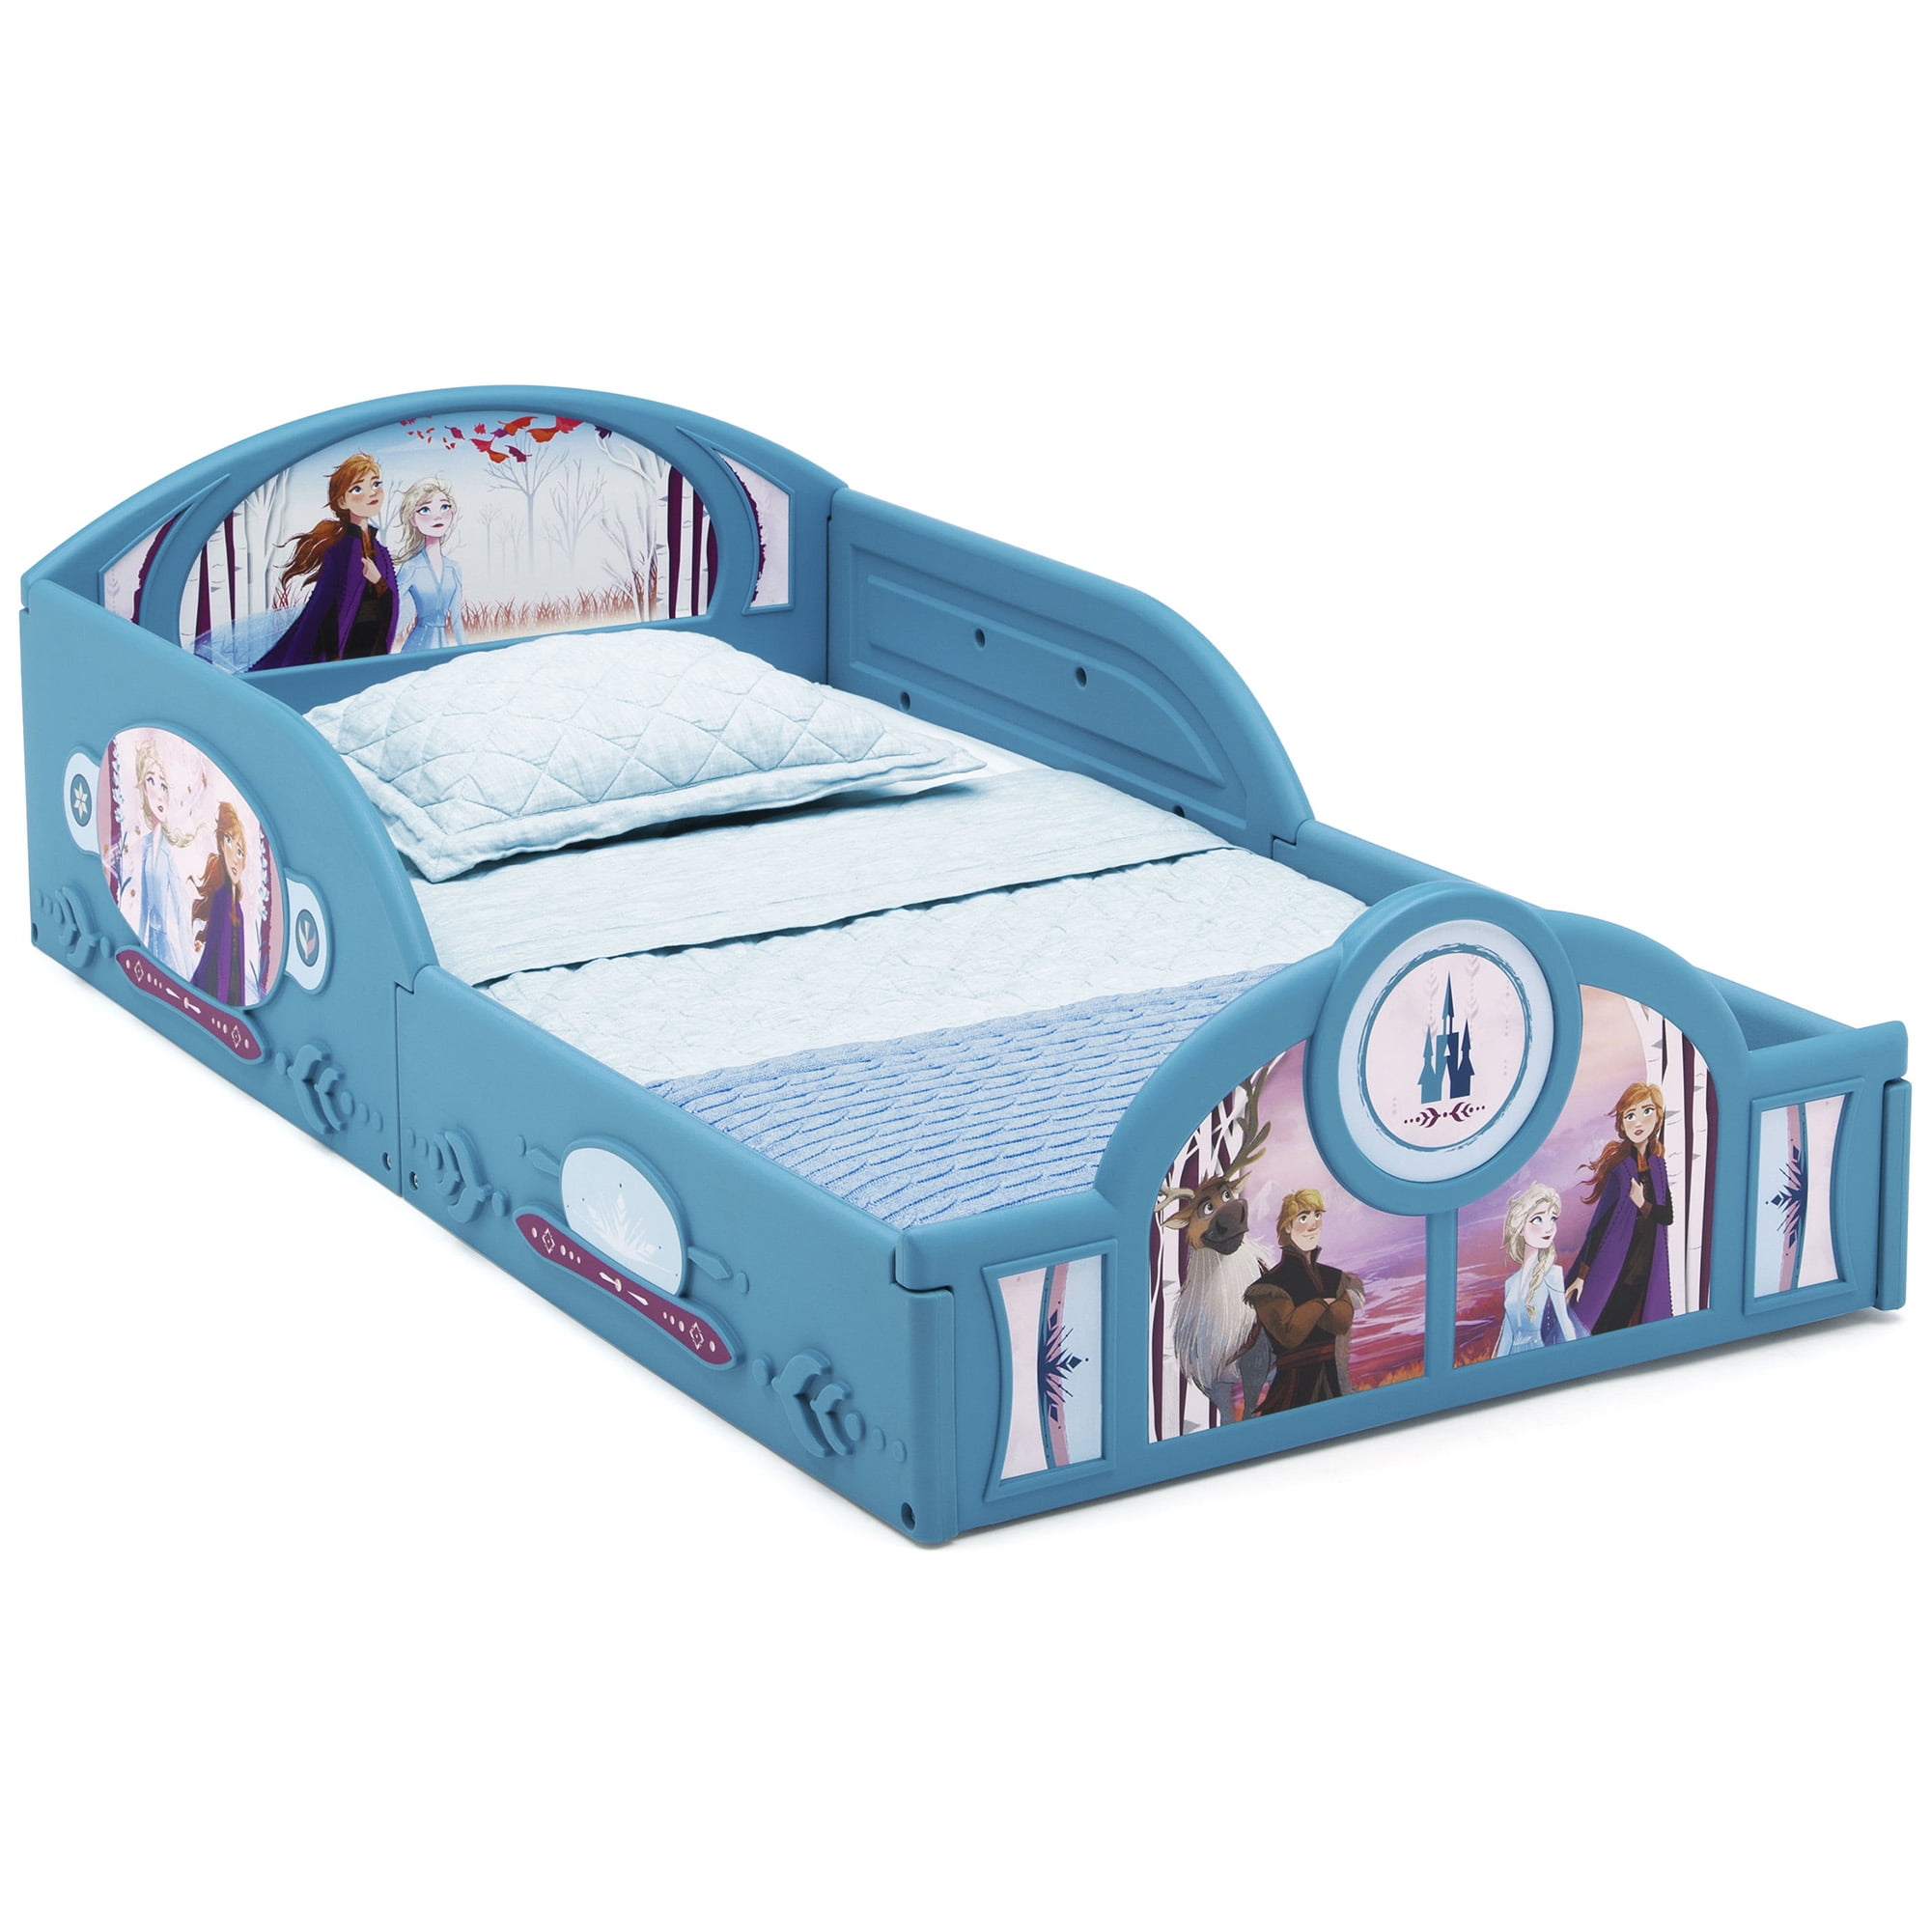 Play Toddler Bed By Delta Children, Sleeping Pit Bed Frame